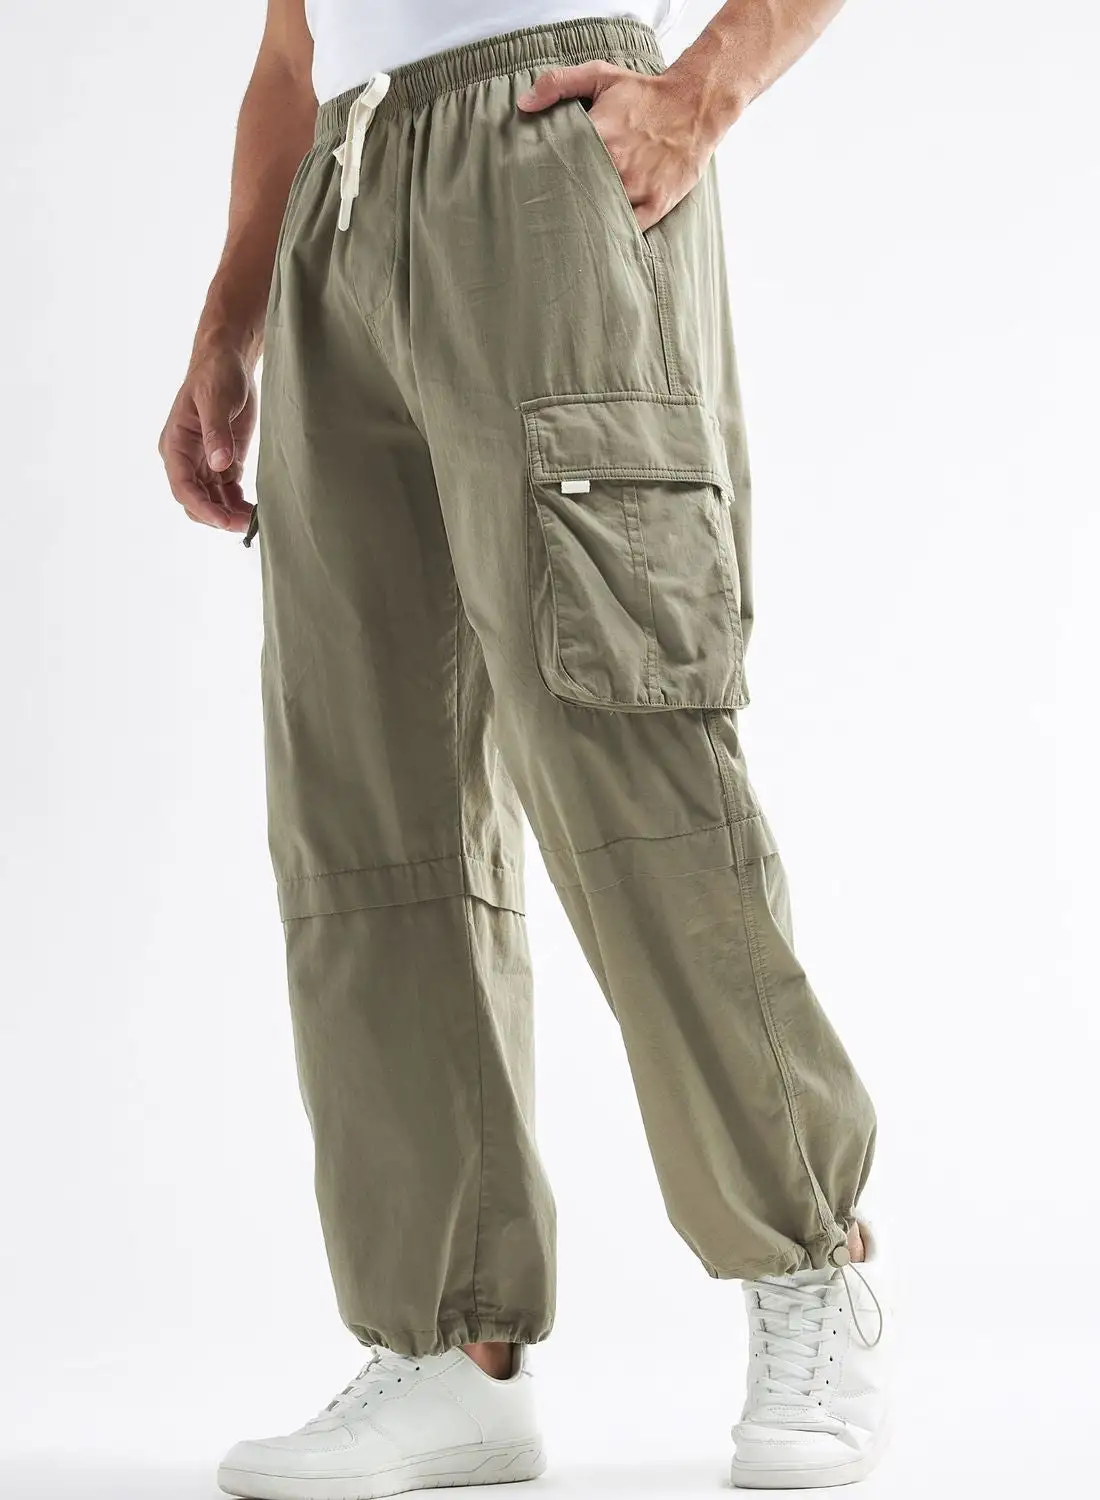 FAV Relaxed Fit Cargo Pants